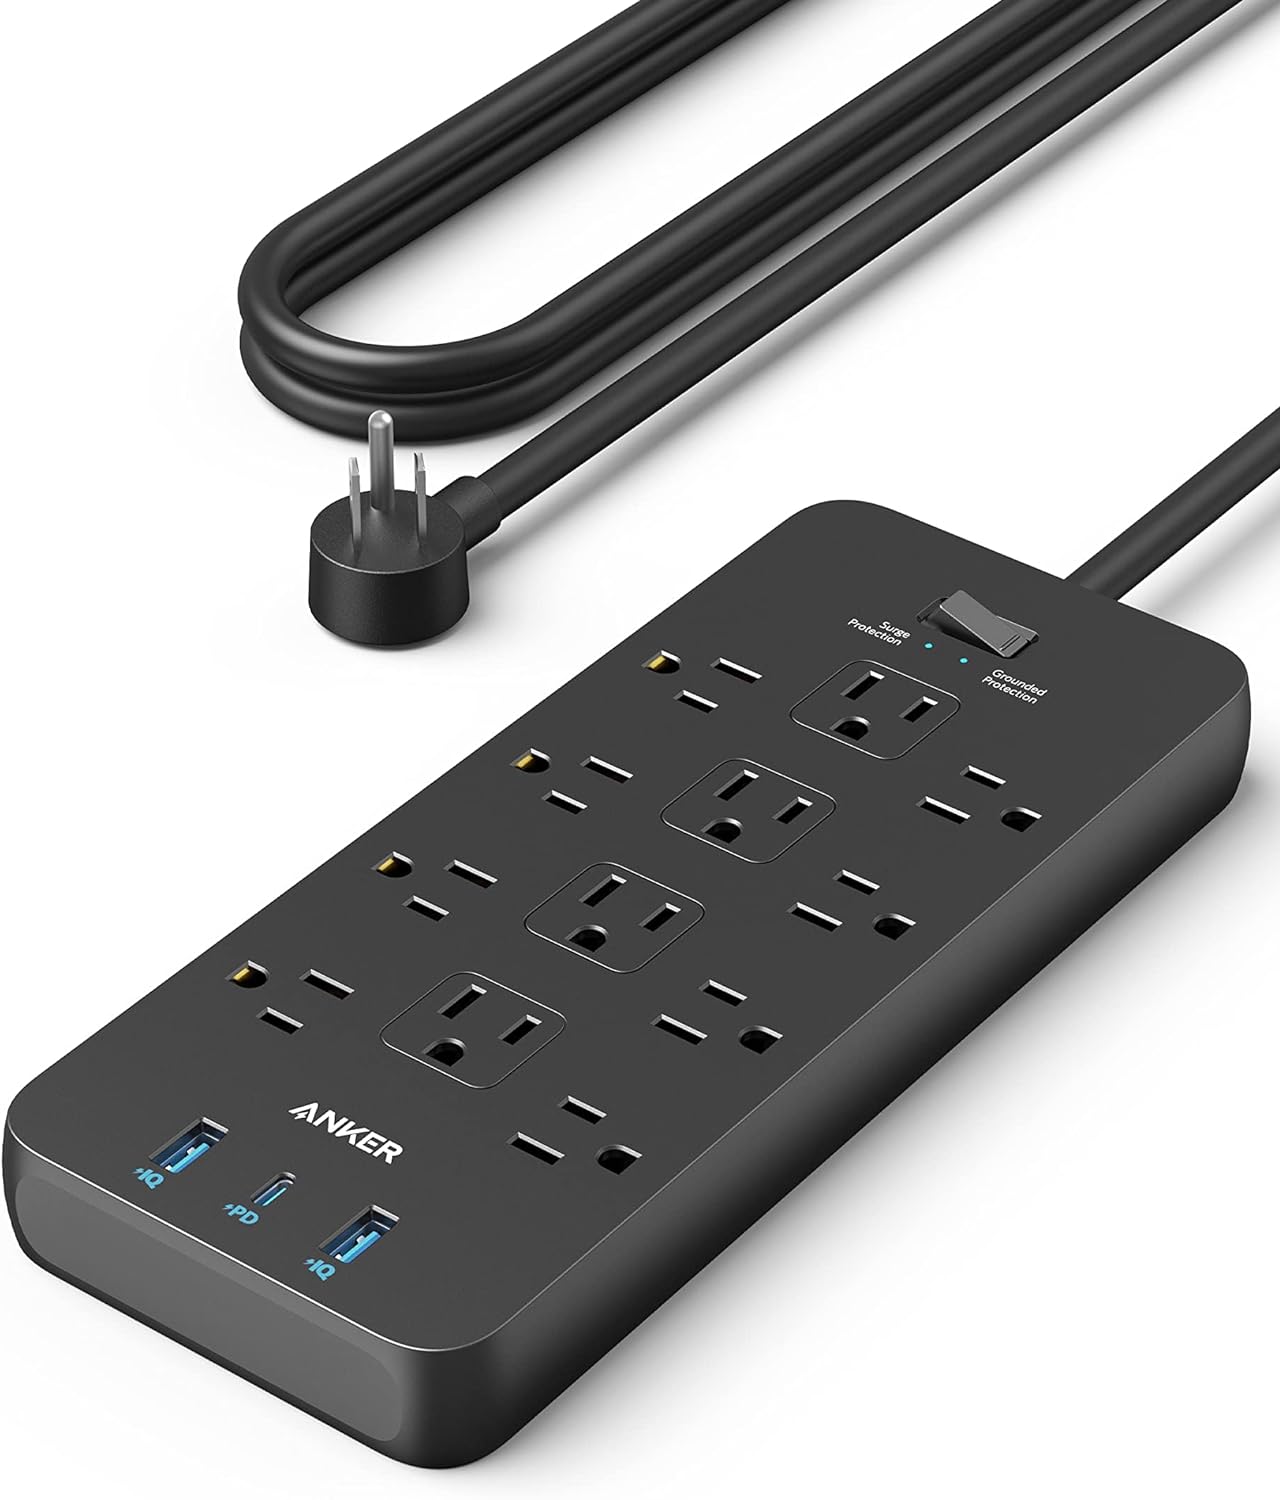 Anker Surge Protector Power Strip with 12 Outlets, USB C, and USB Ports, 5ft Extension Cord, 20W USB C Charging, TUV Listed $21.98